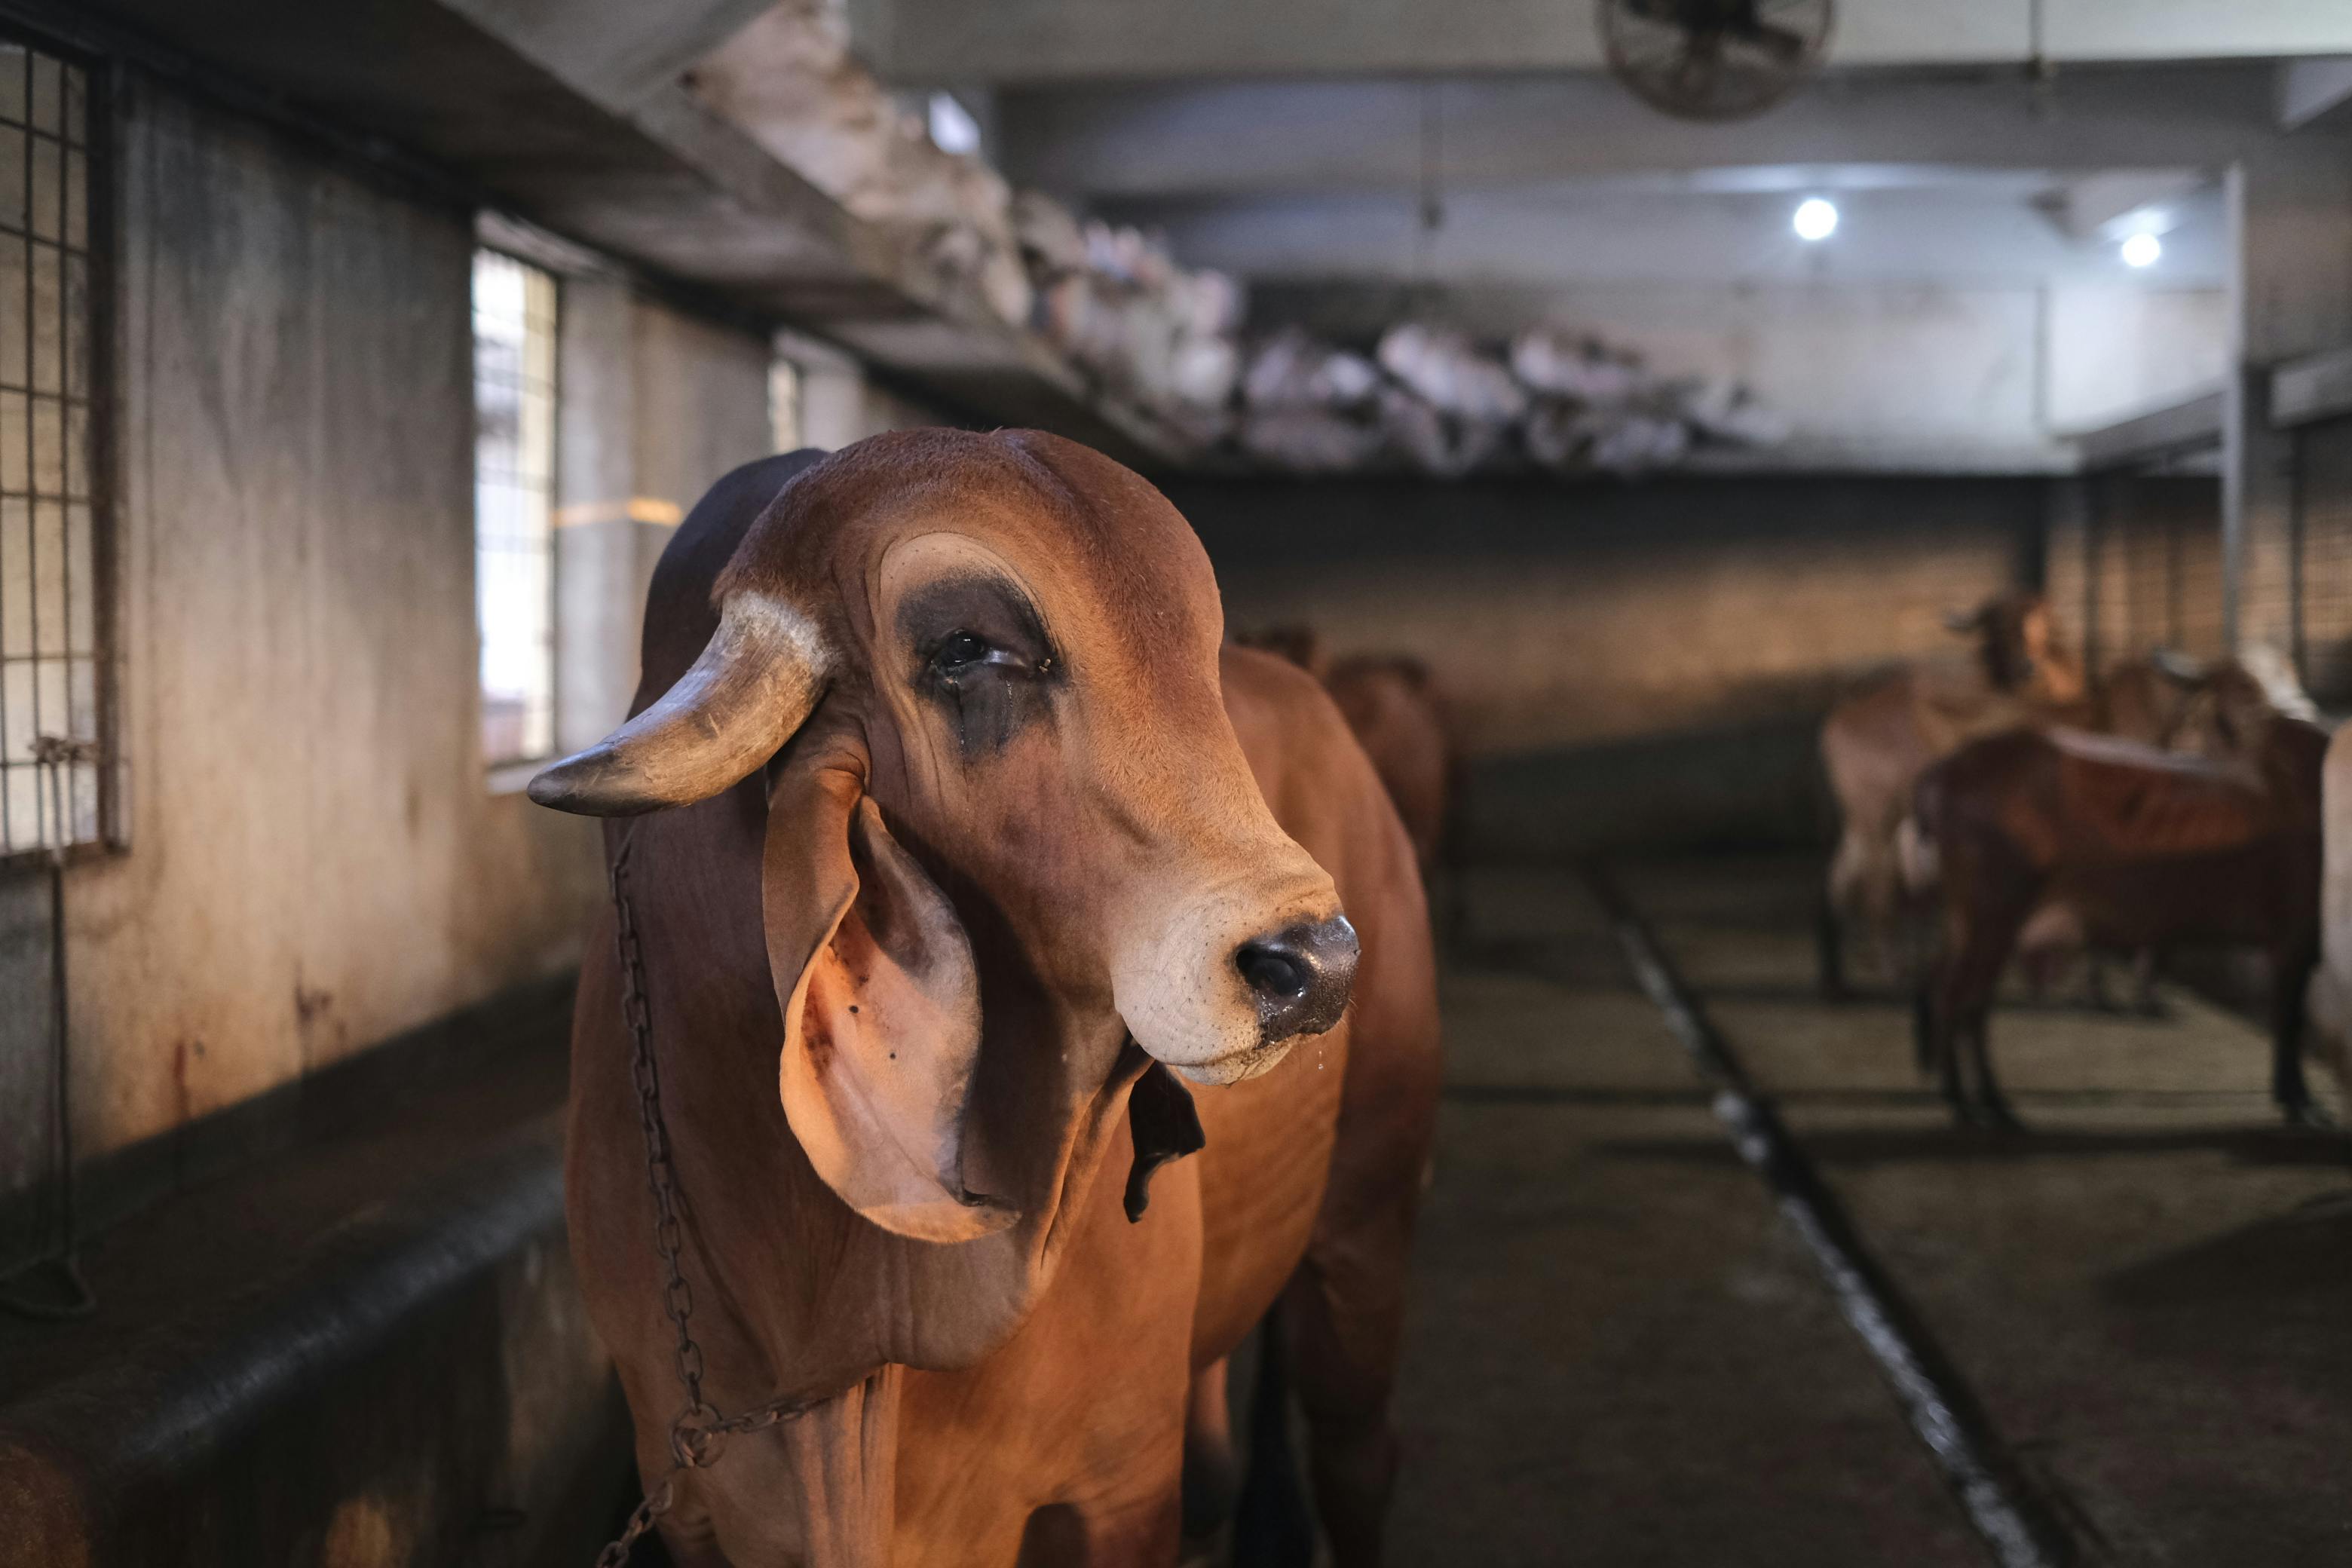 Brown dairy cow in cow shed with fresh straw on floor - Stock Image -  C053/7925 - Science Photo Library